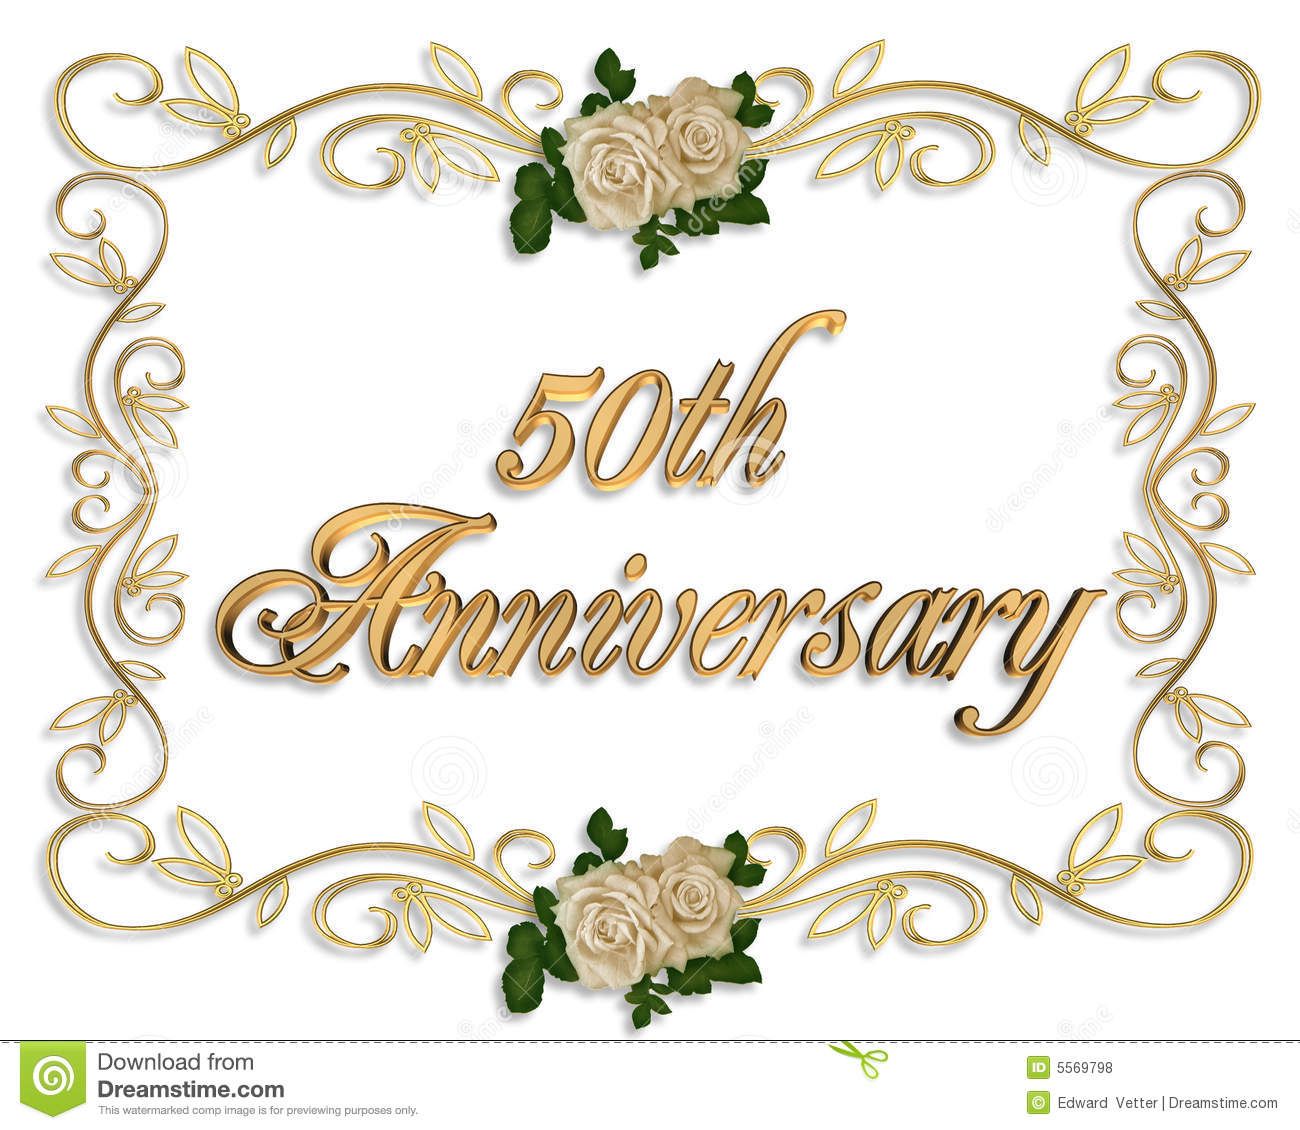 5oth-anniversary-gold-flowers-clipart-10-free-cliparts-download